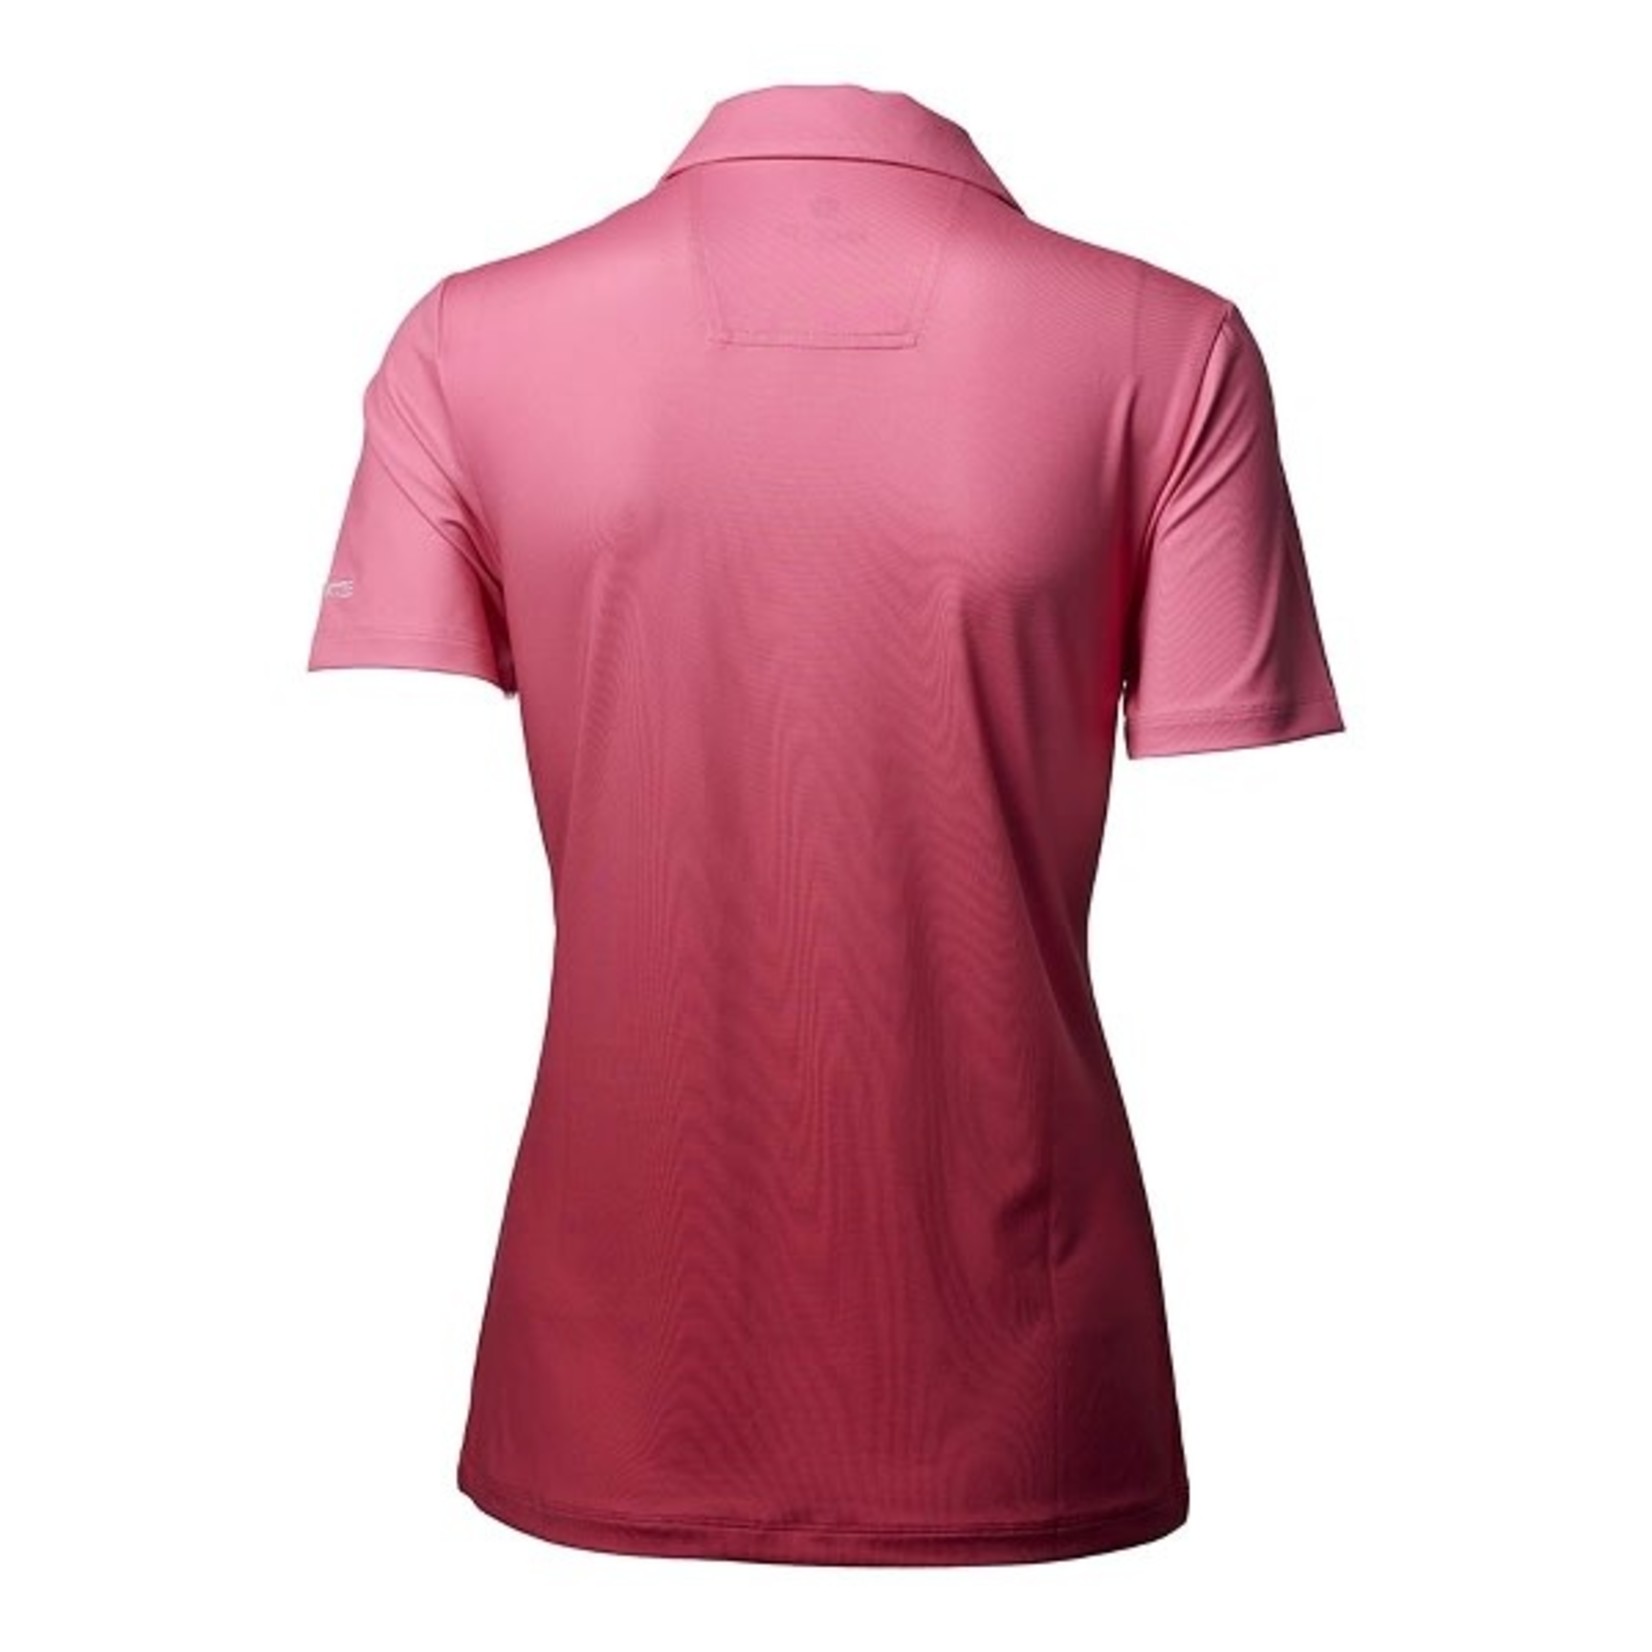 Backtee Backtee Ladies Dip Dye Polo roze/rood 2XL